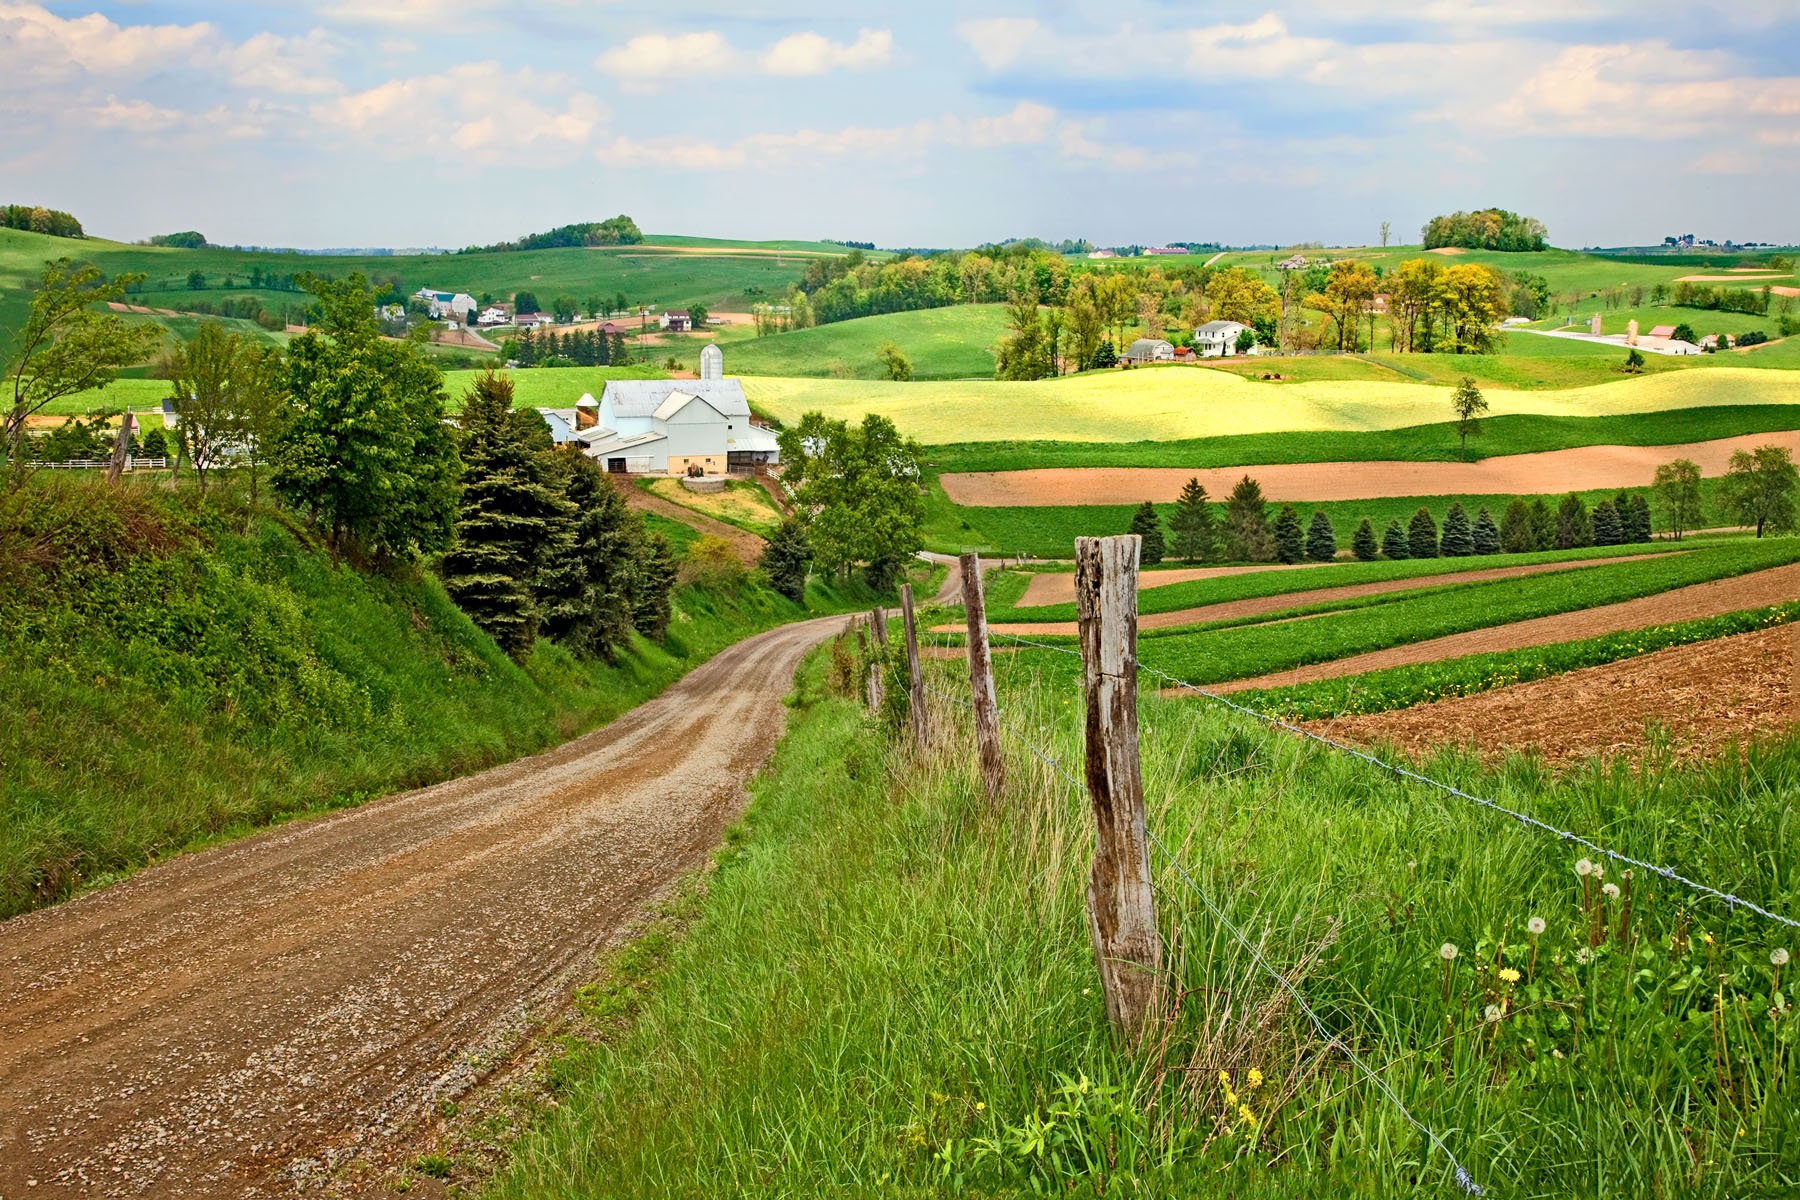 VALLEY VIEW - What a beautiful country we live in. This photo was taken in Holmes County in central Ohio.